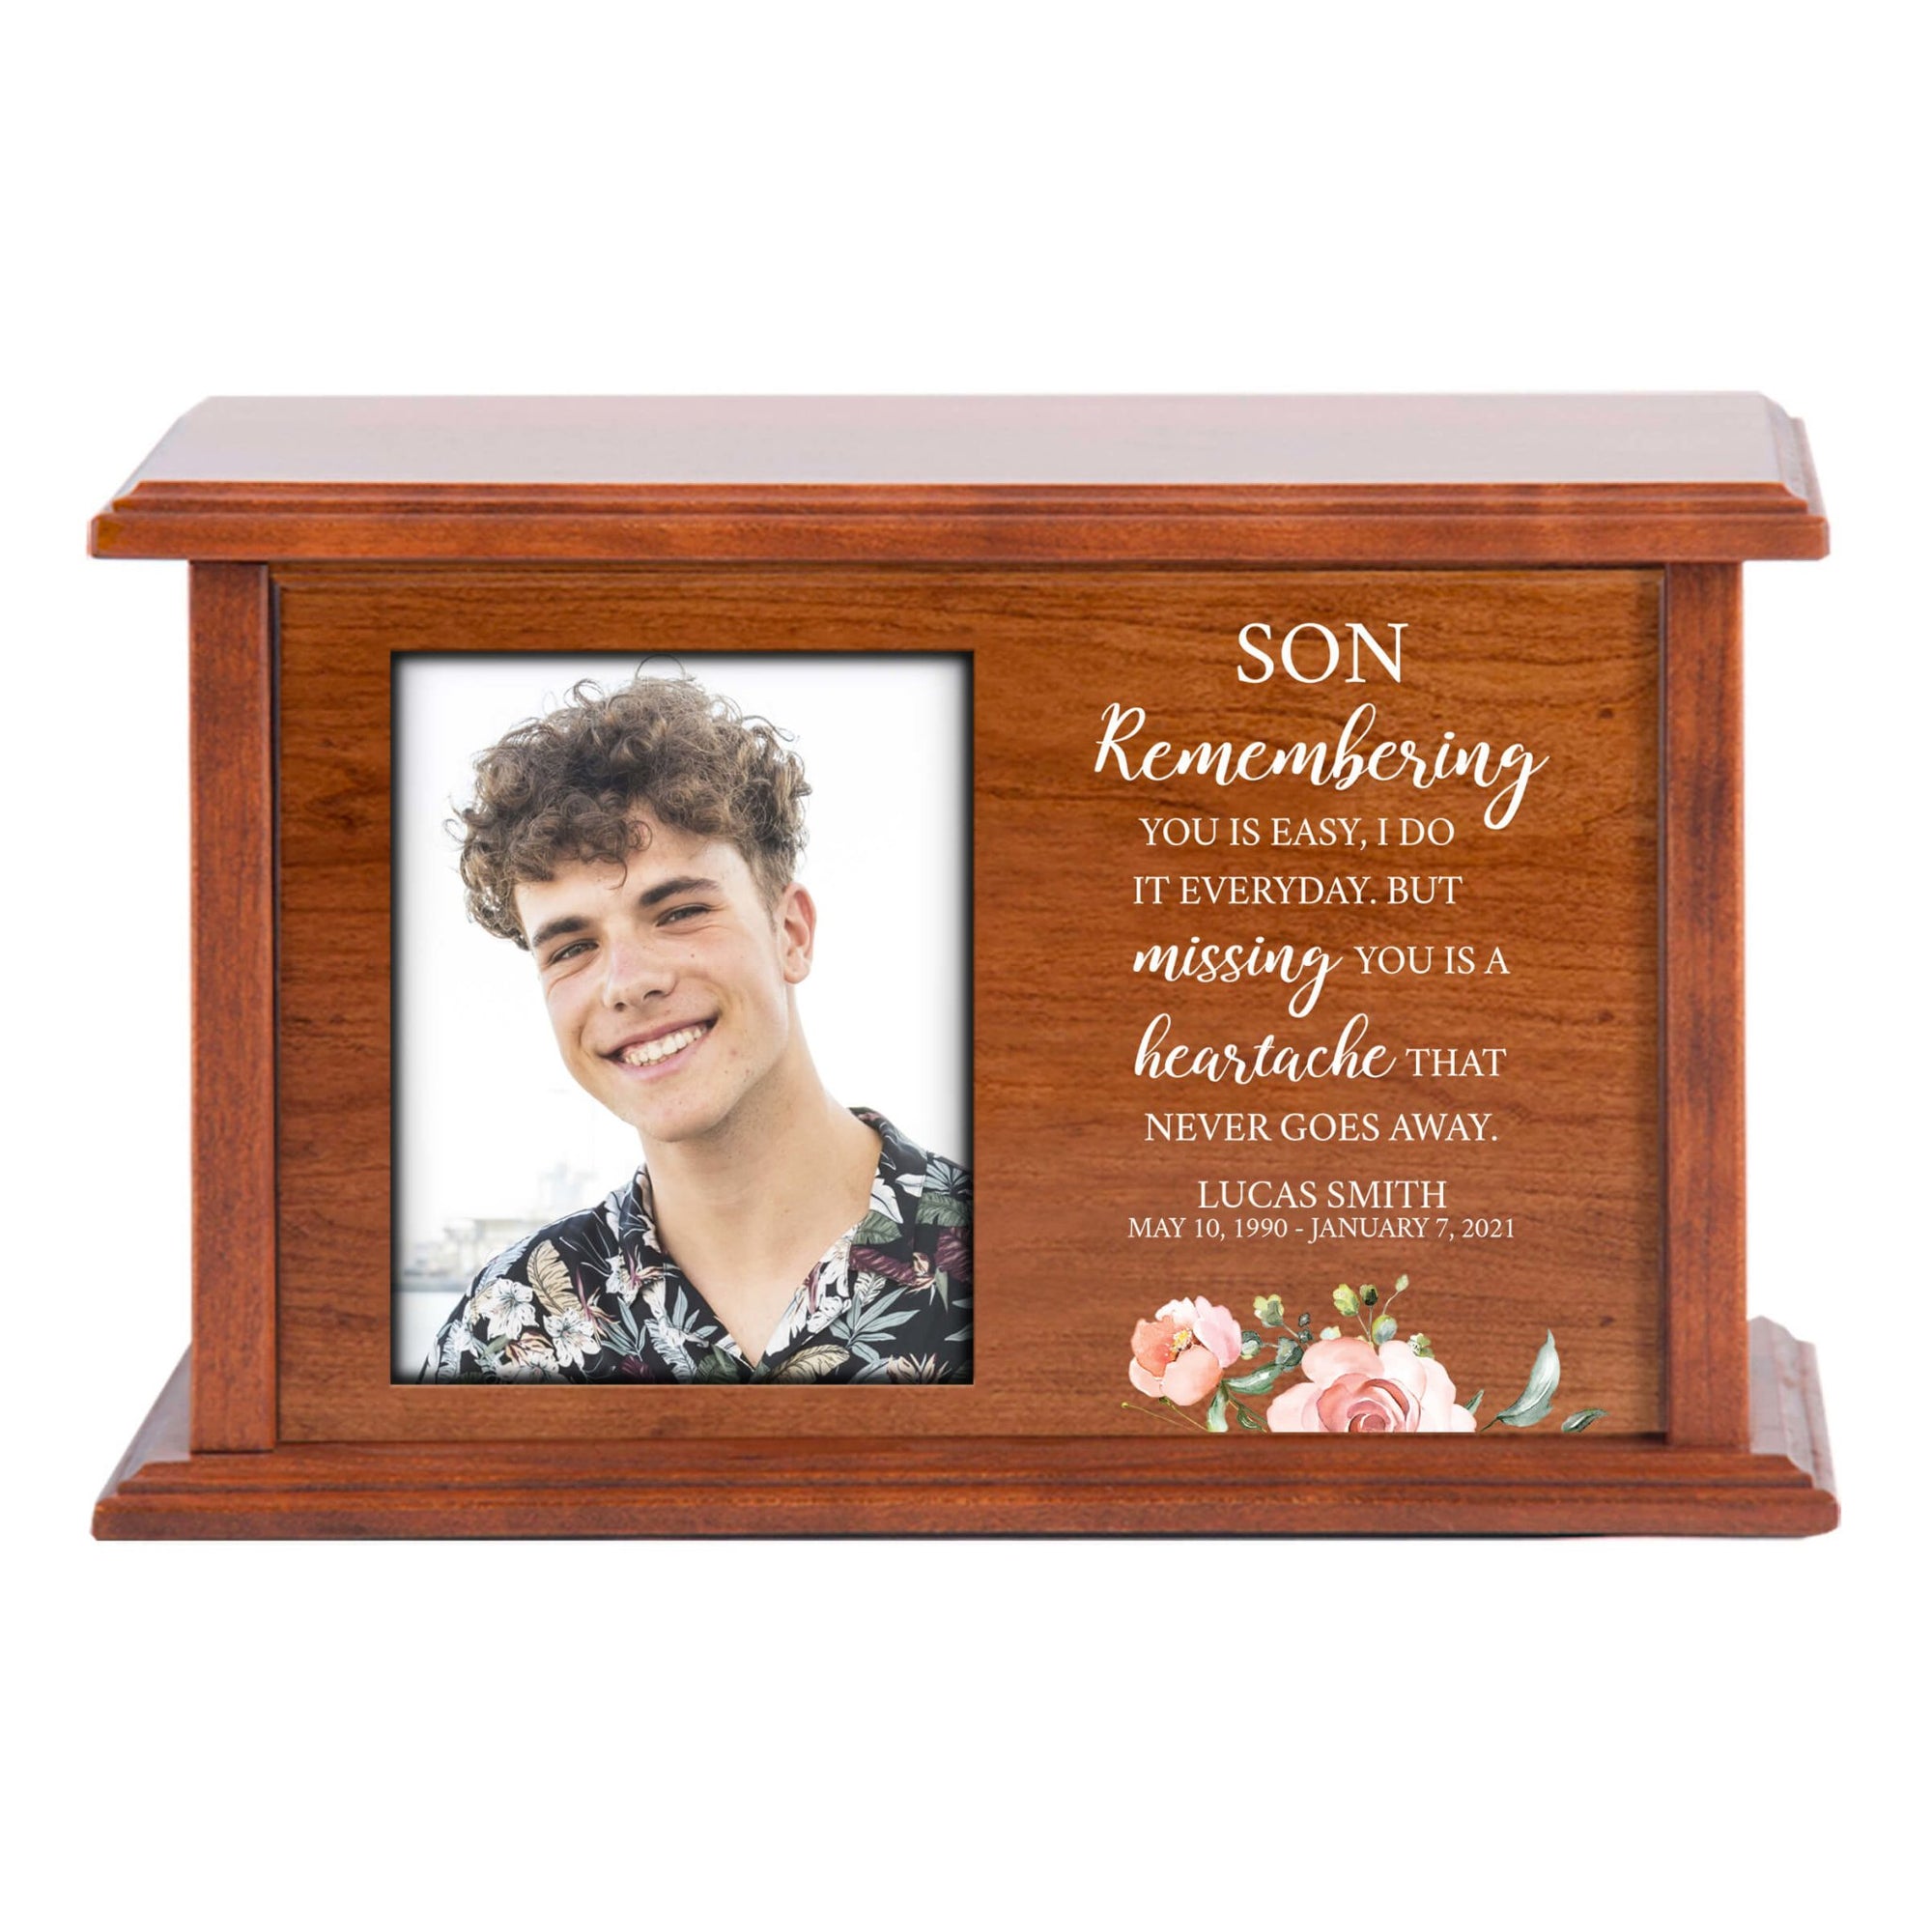 Custom Engraved Photo Cremation Urn - Remembering You Is Easy - LifeSong Milestones